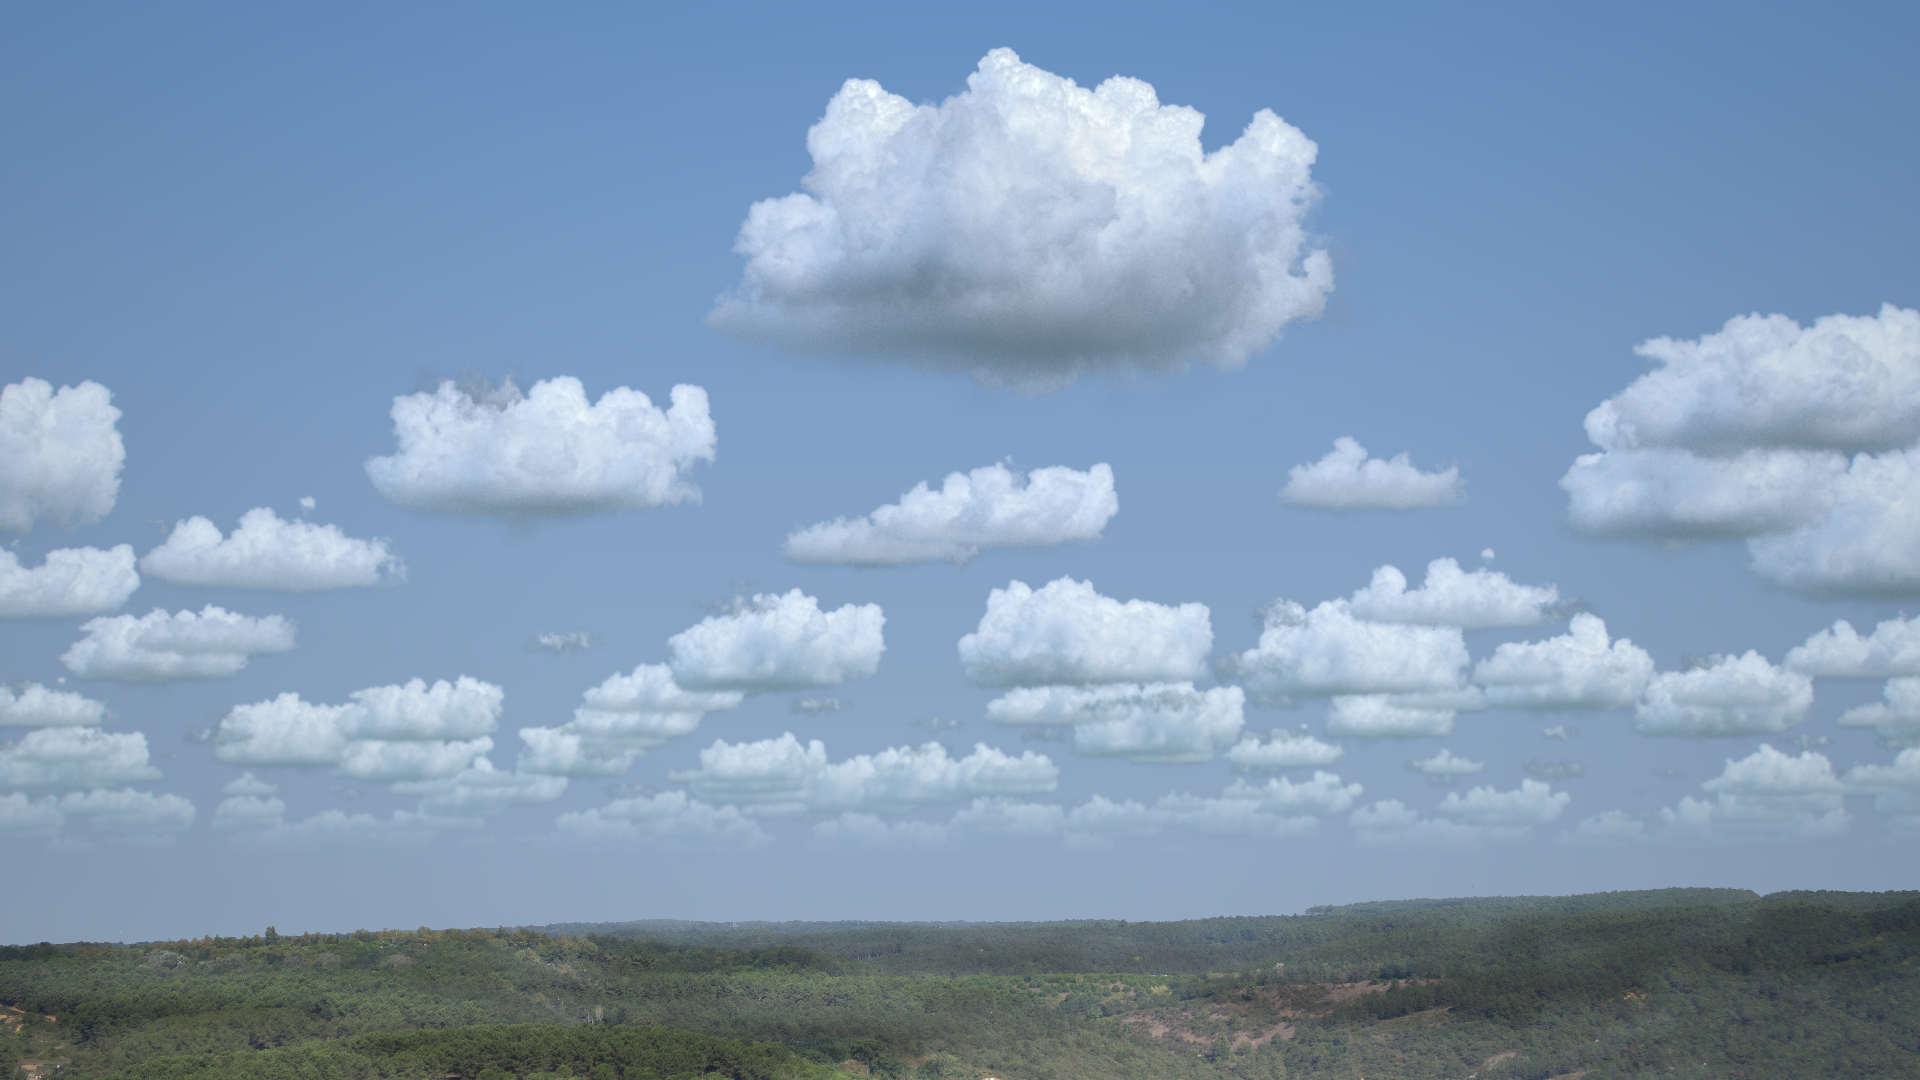 A partly cloudy day with medium cloud coverage